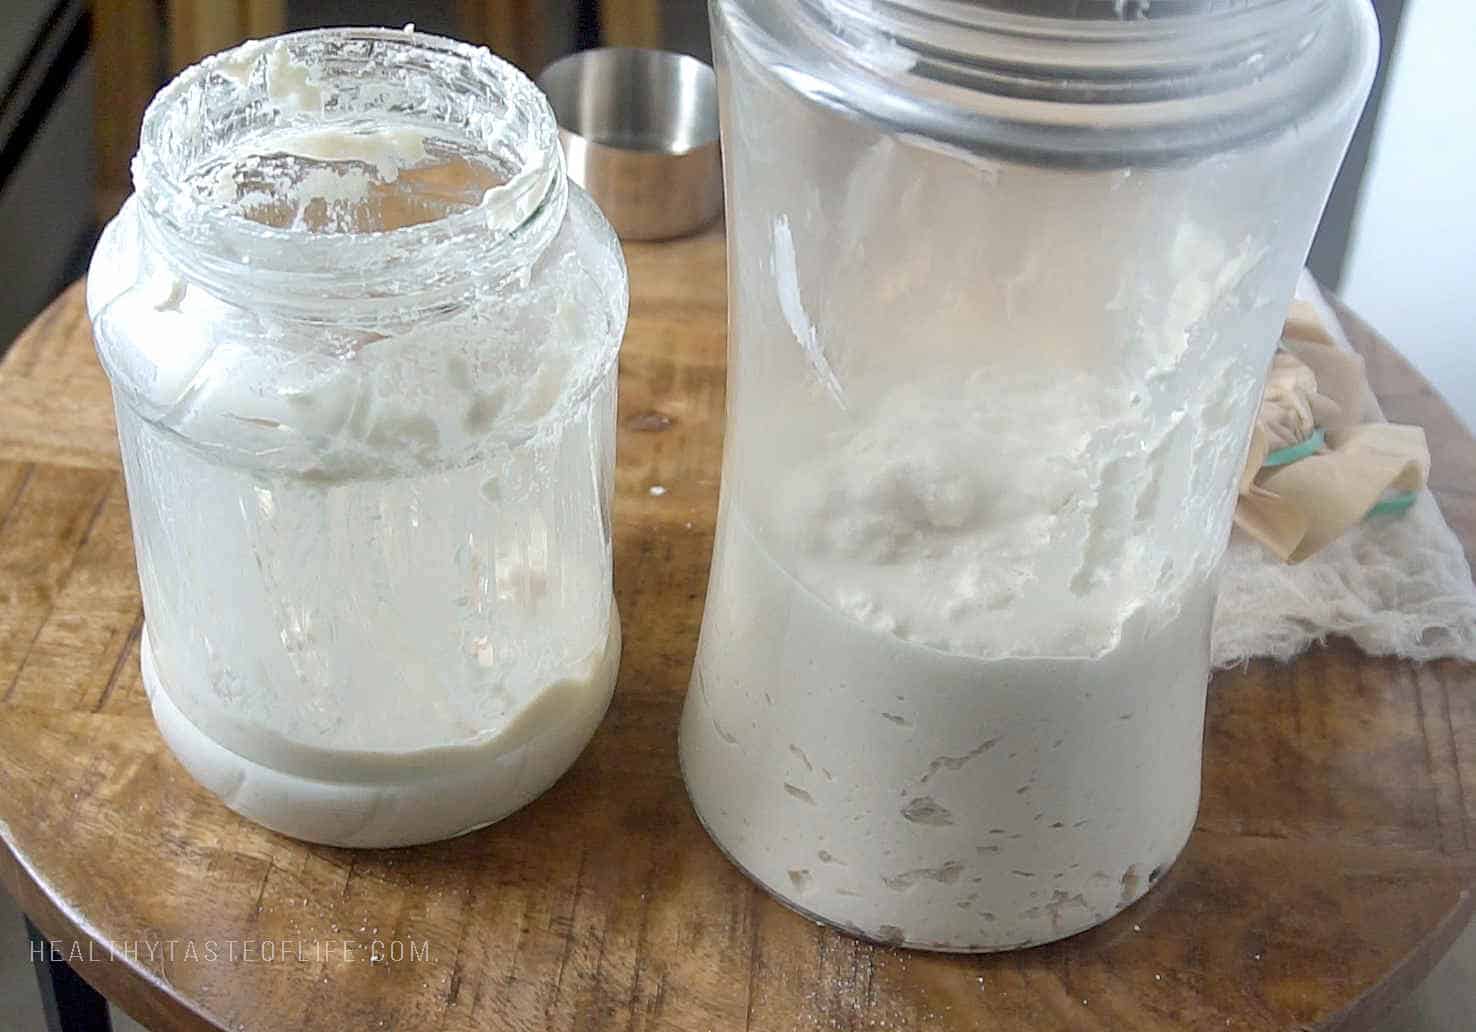 Keeping the discard of gluten free sourdough starter for future recipes